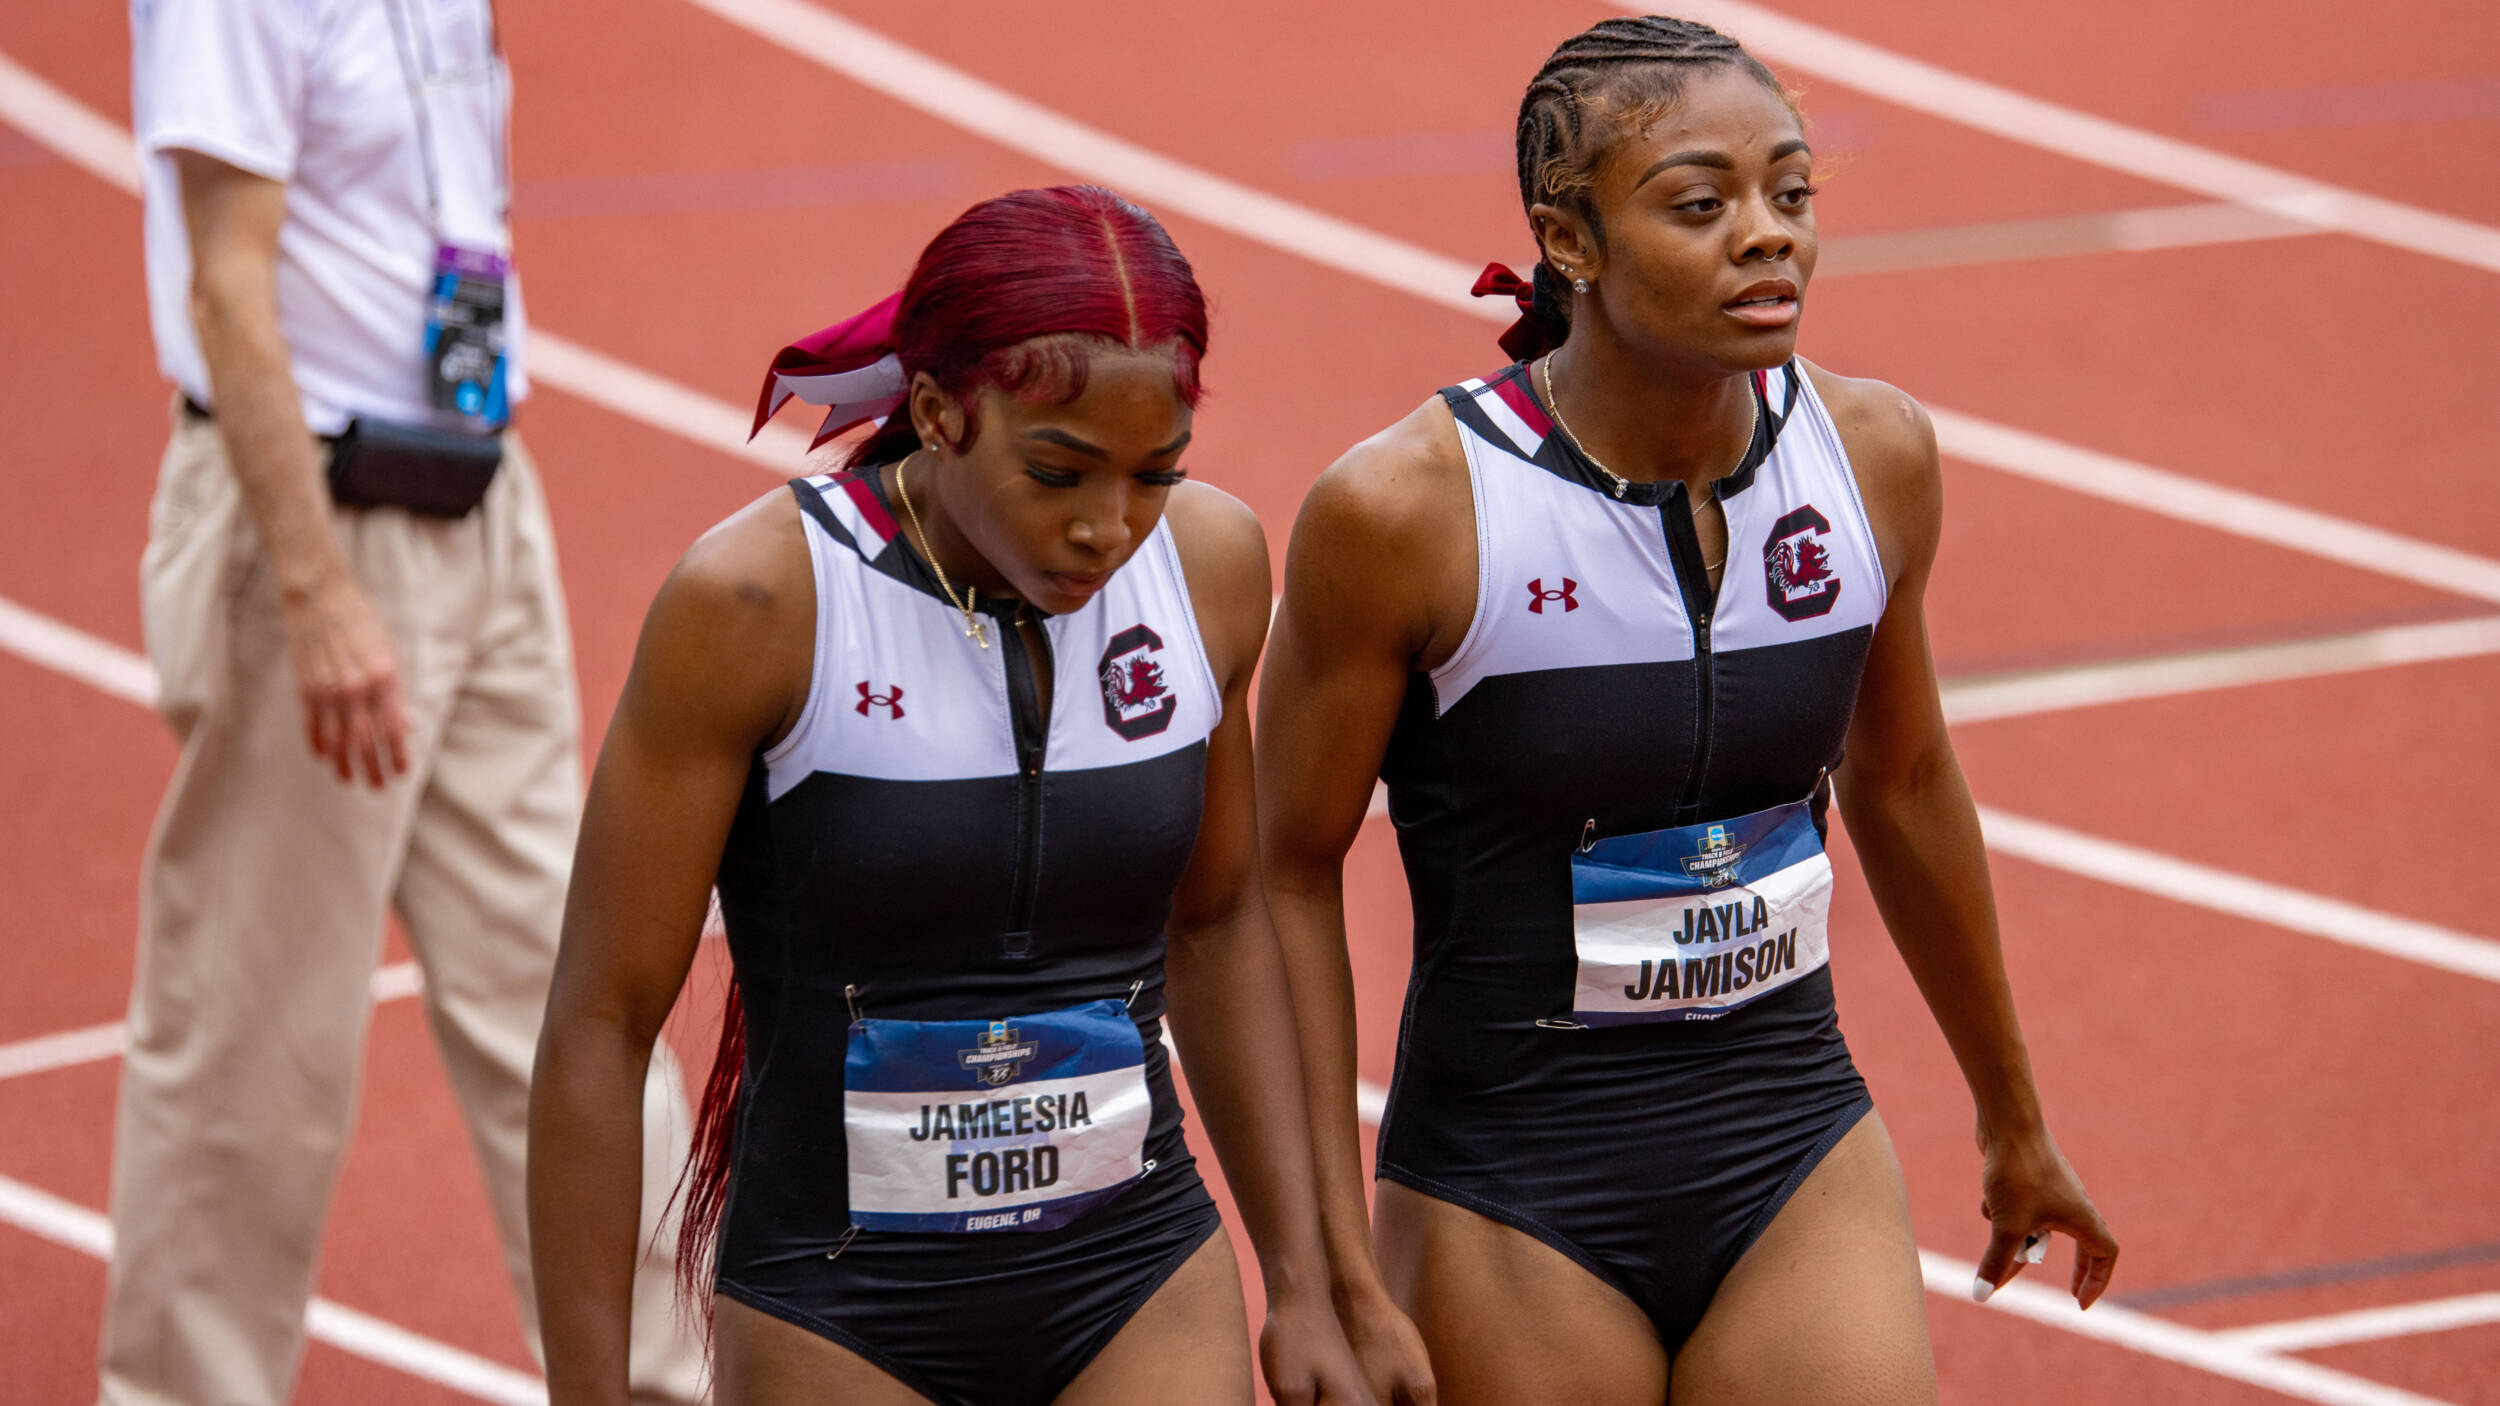 Gamecock Women Finish 15th at NCAA Outdoor Championship